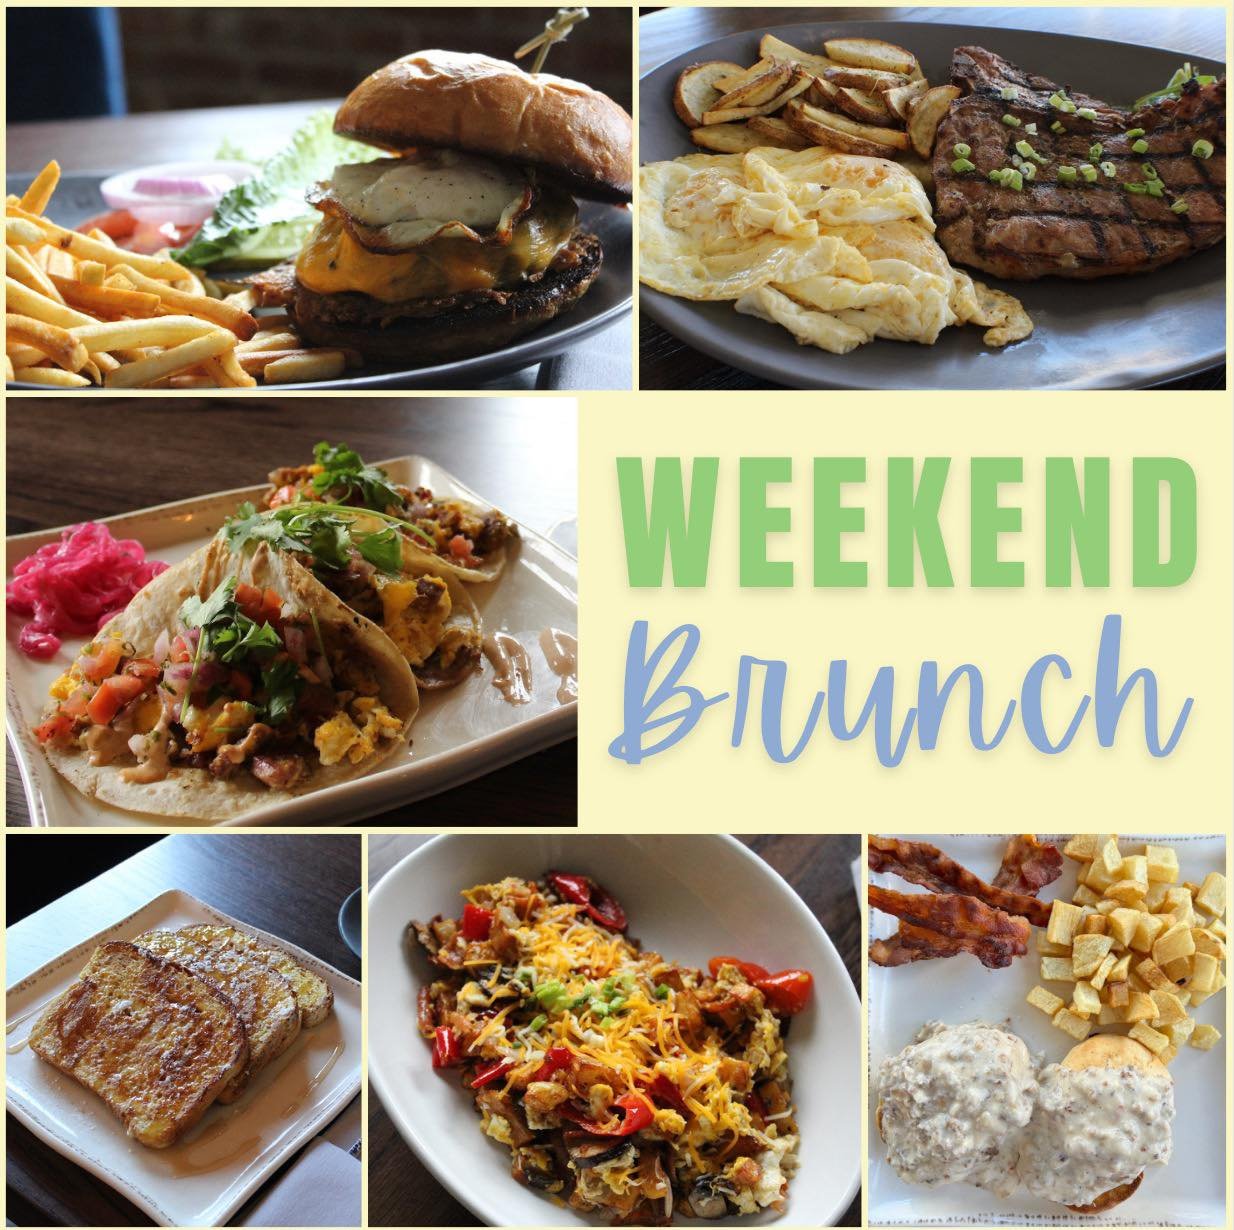 Ready for brunch? 🍳🥞 Powerhouse Social has you covered with tasty dishes and refreshing mimosas. 🍾 Make your weekend special with friends and unforgettable moments. 🎉